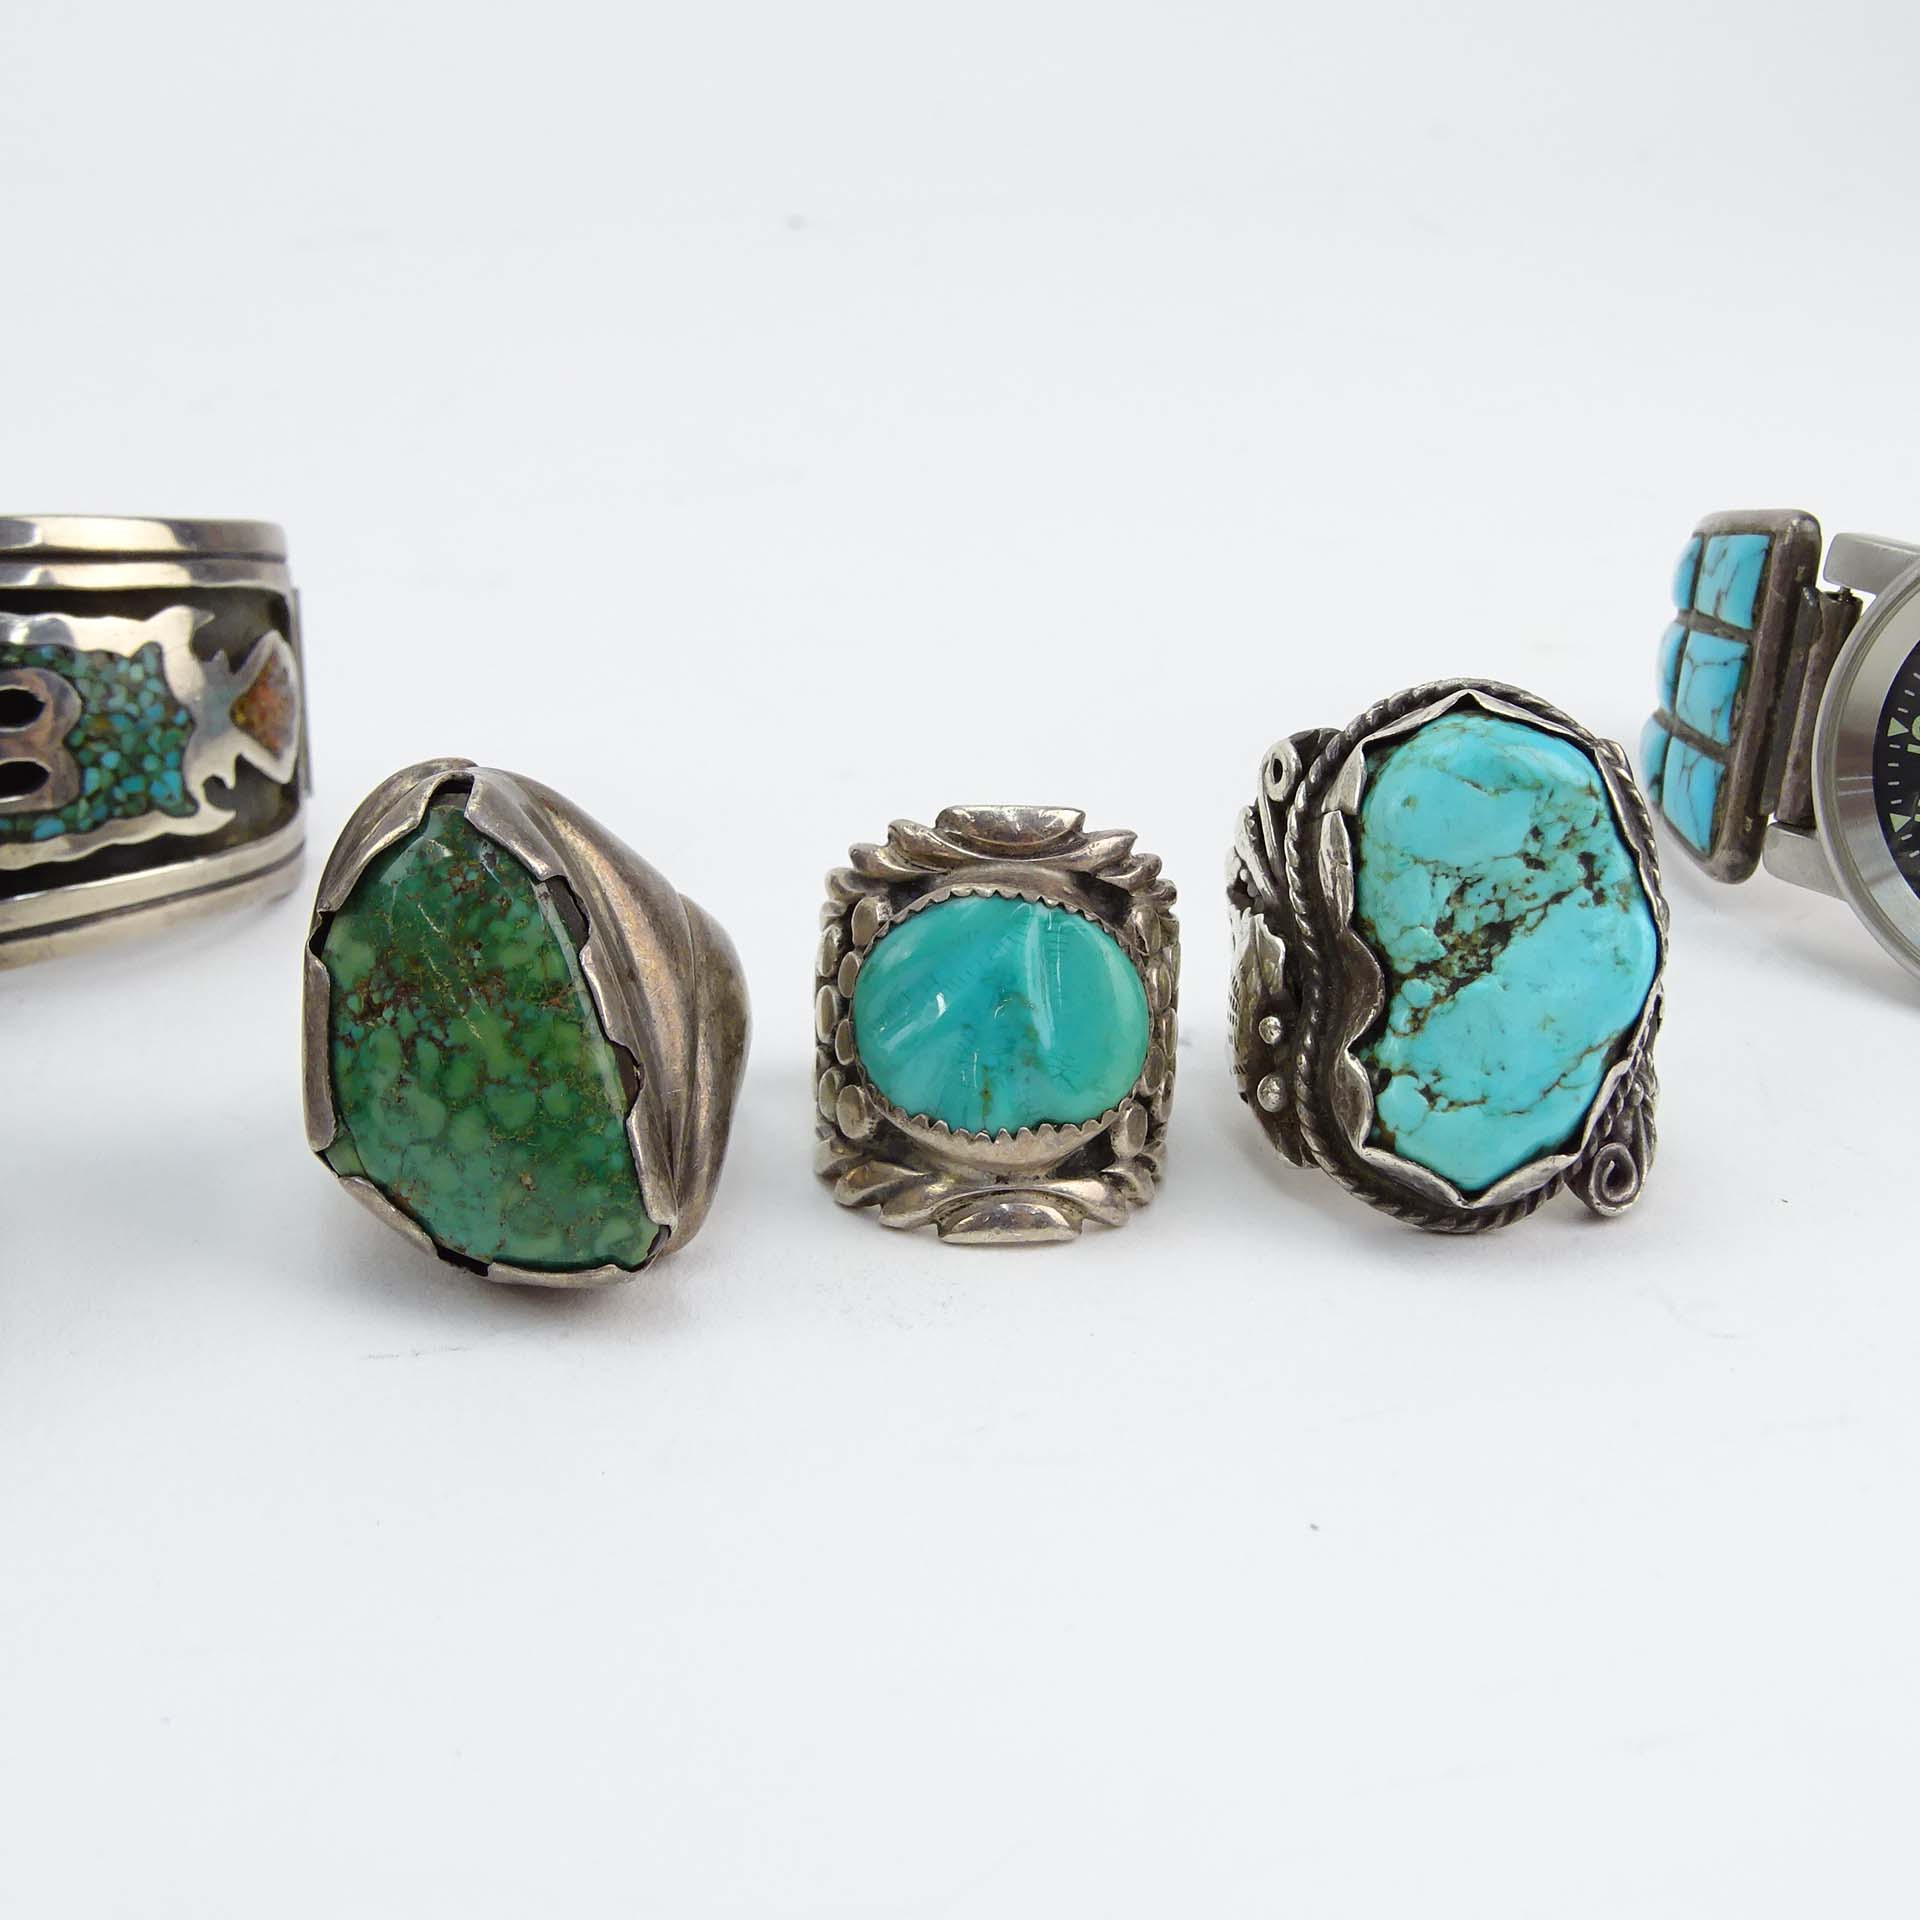 Vintage Seven (7) Piece Collection of Navajo or Navajo style Sterling Silver and Turquoise Jewelry.